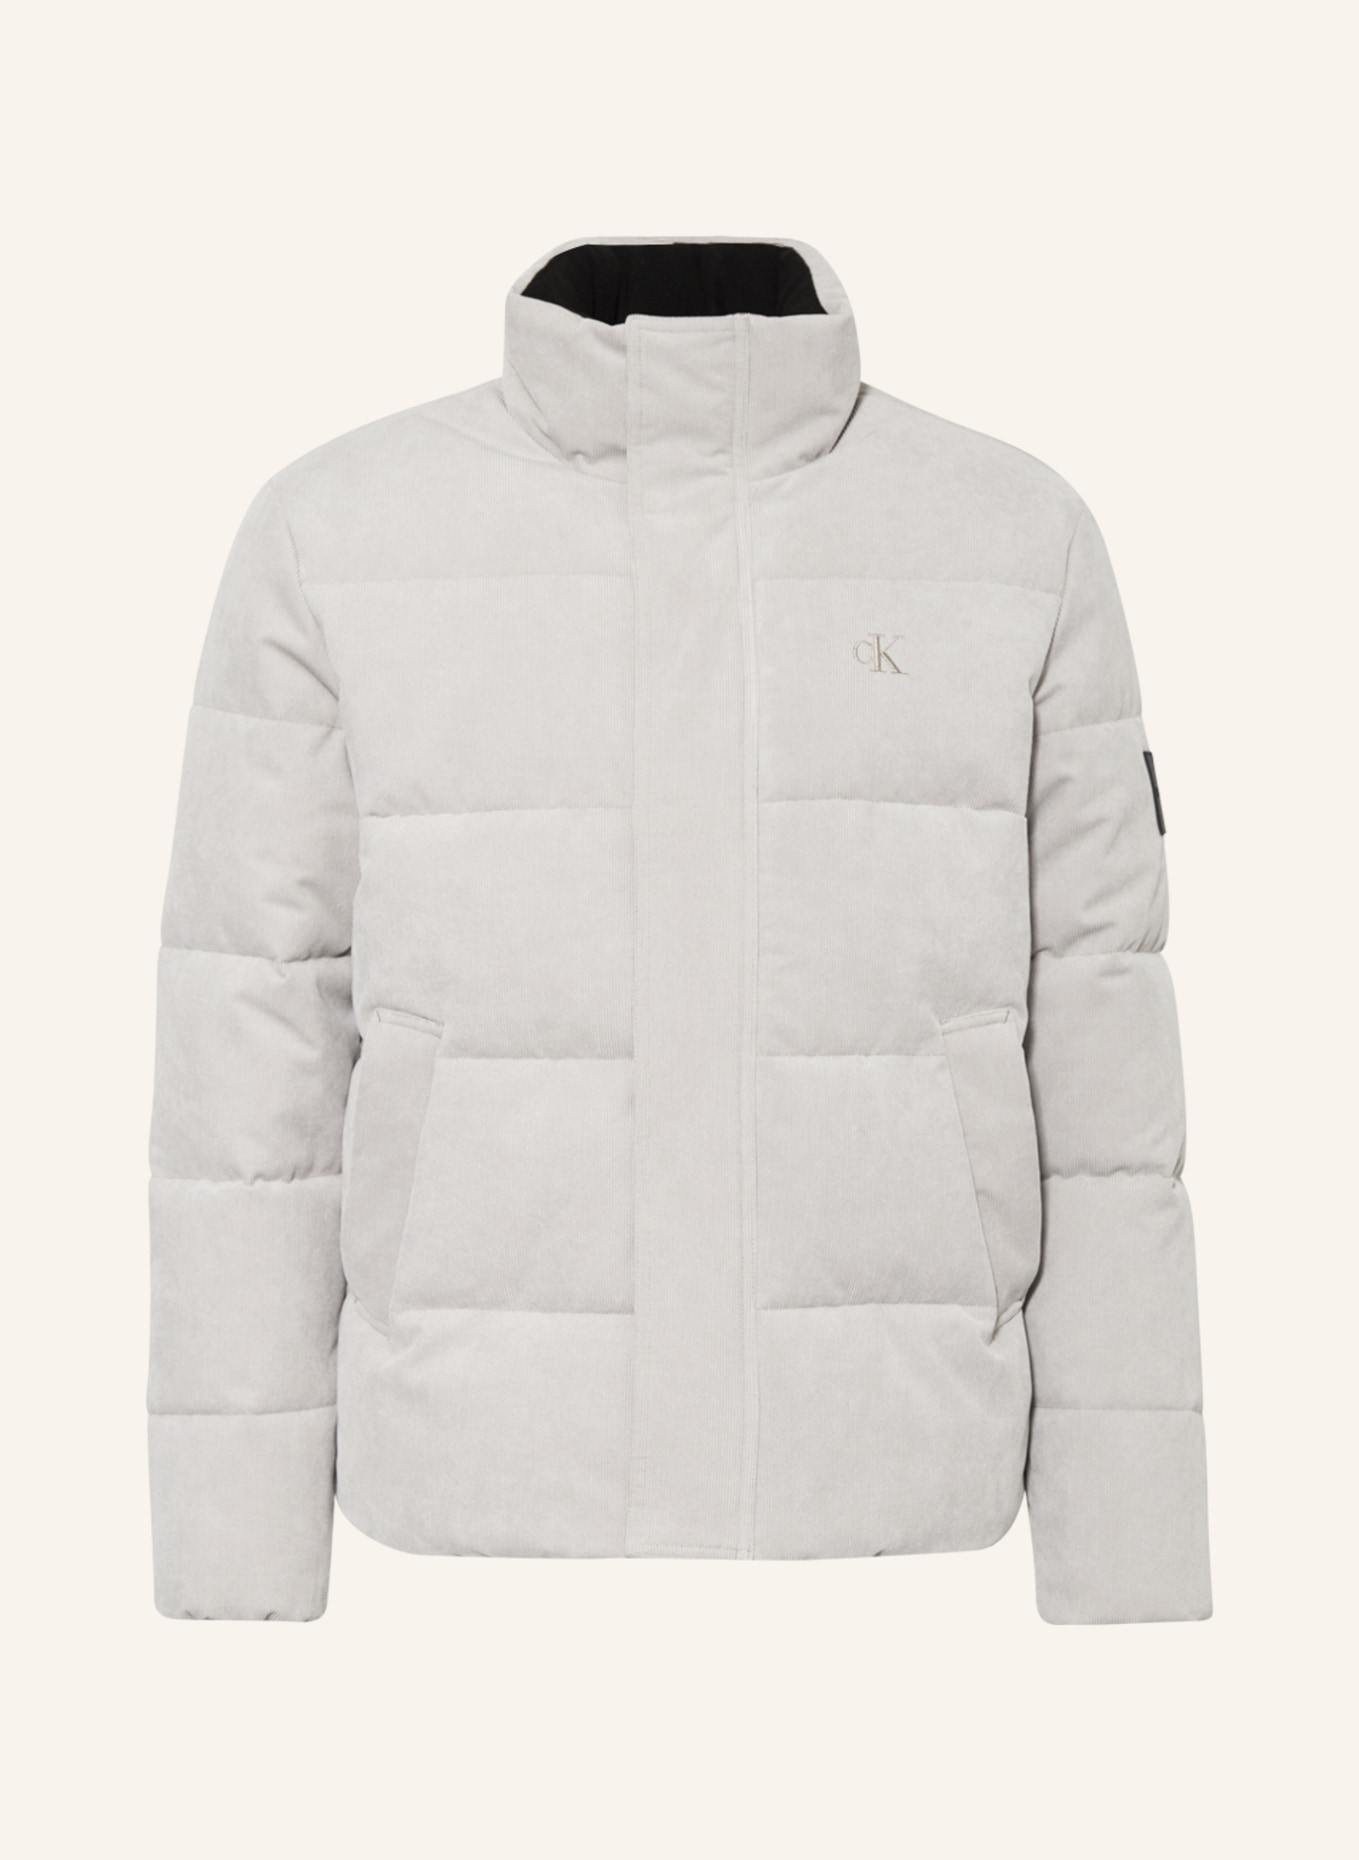 Calvin Klein Jeans Quilted jacket made of corduroy in light gray